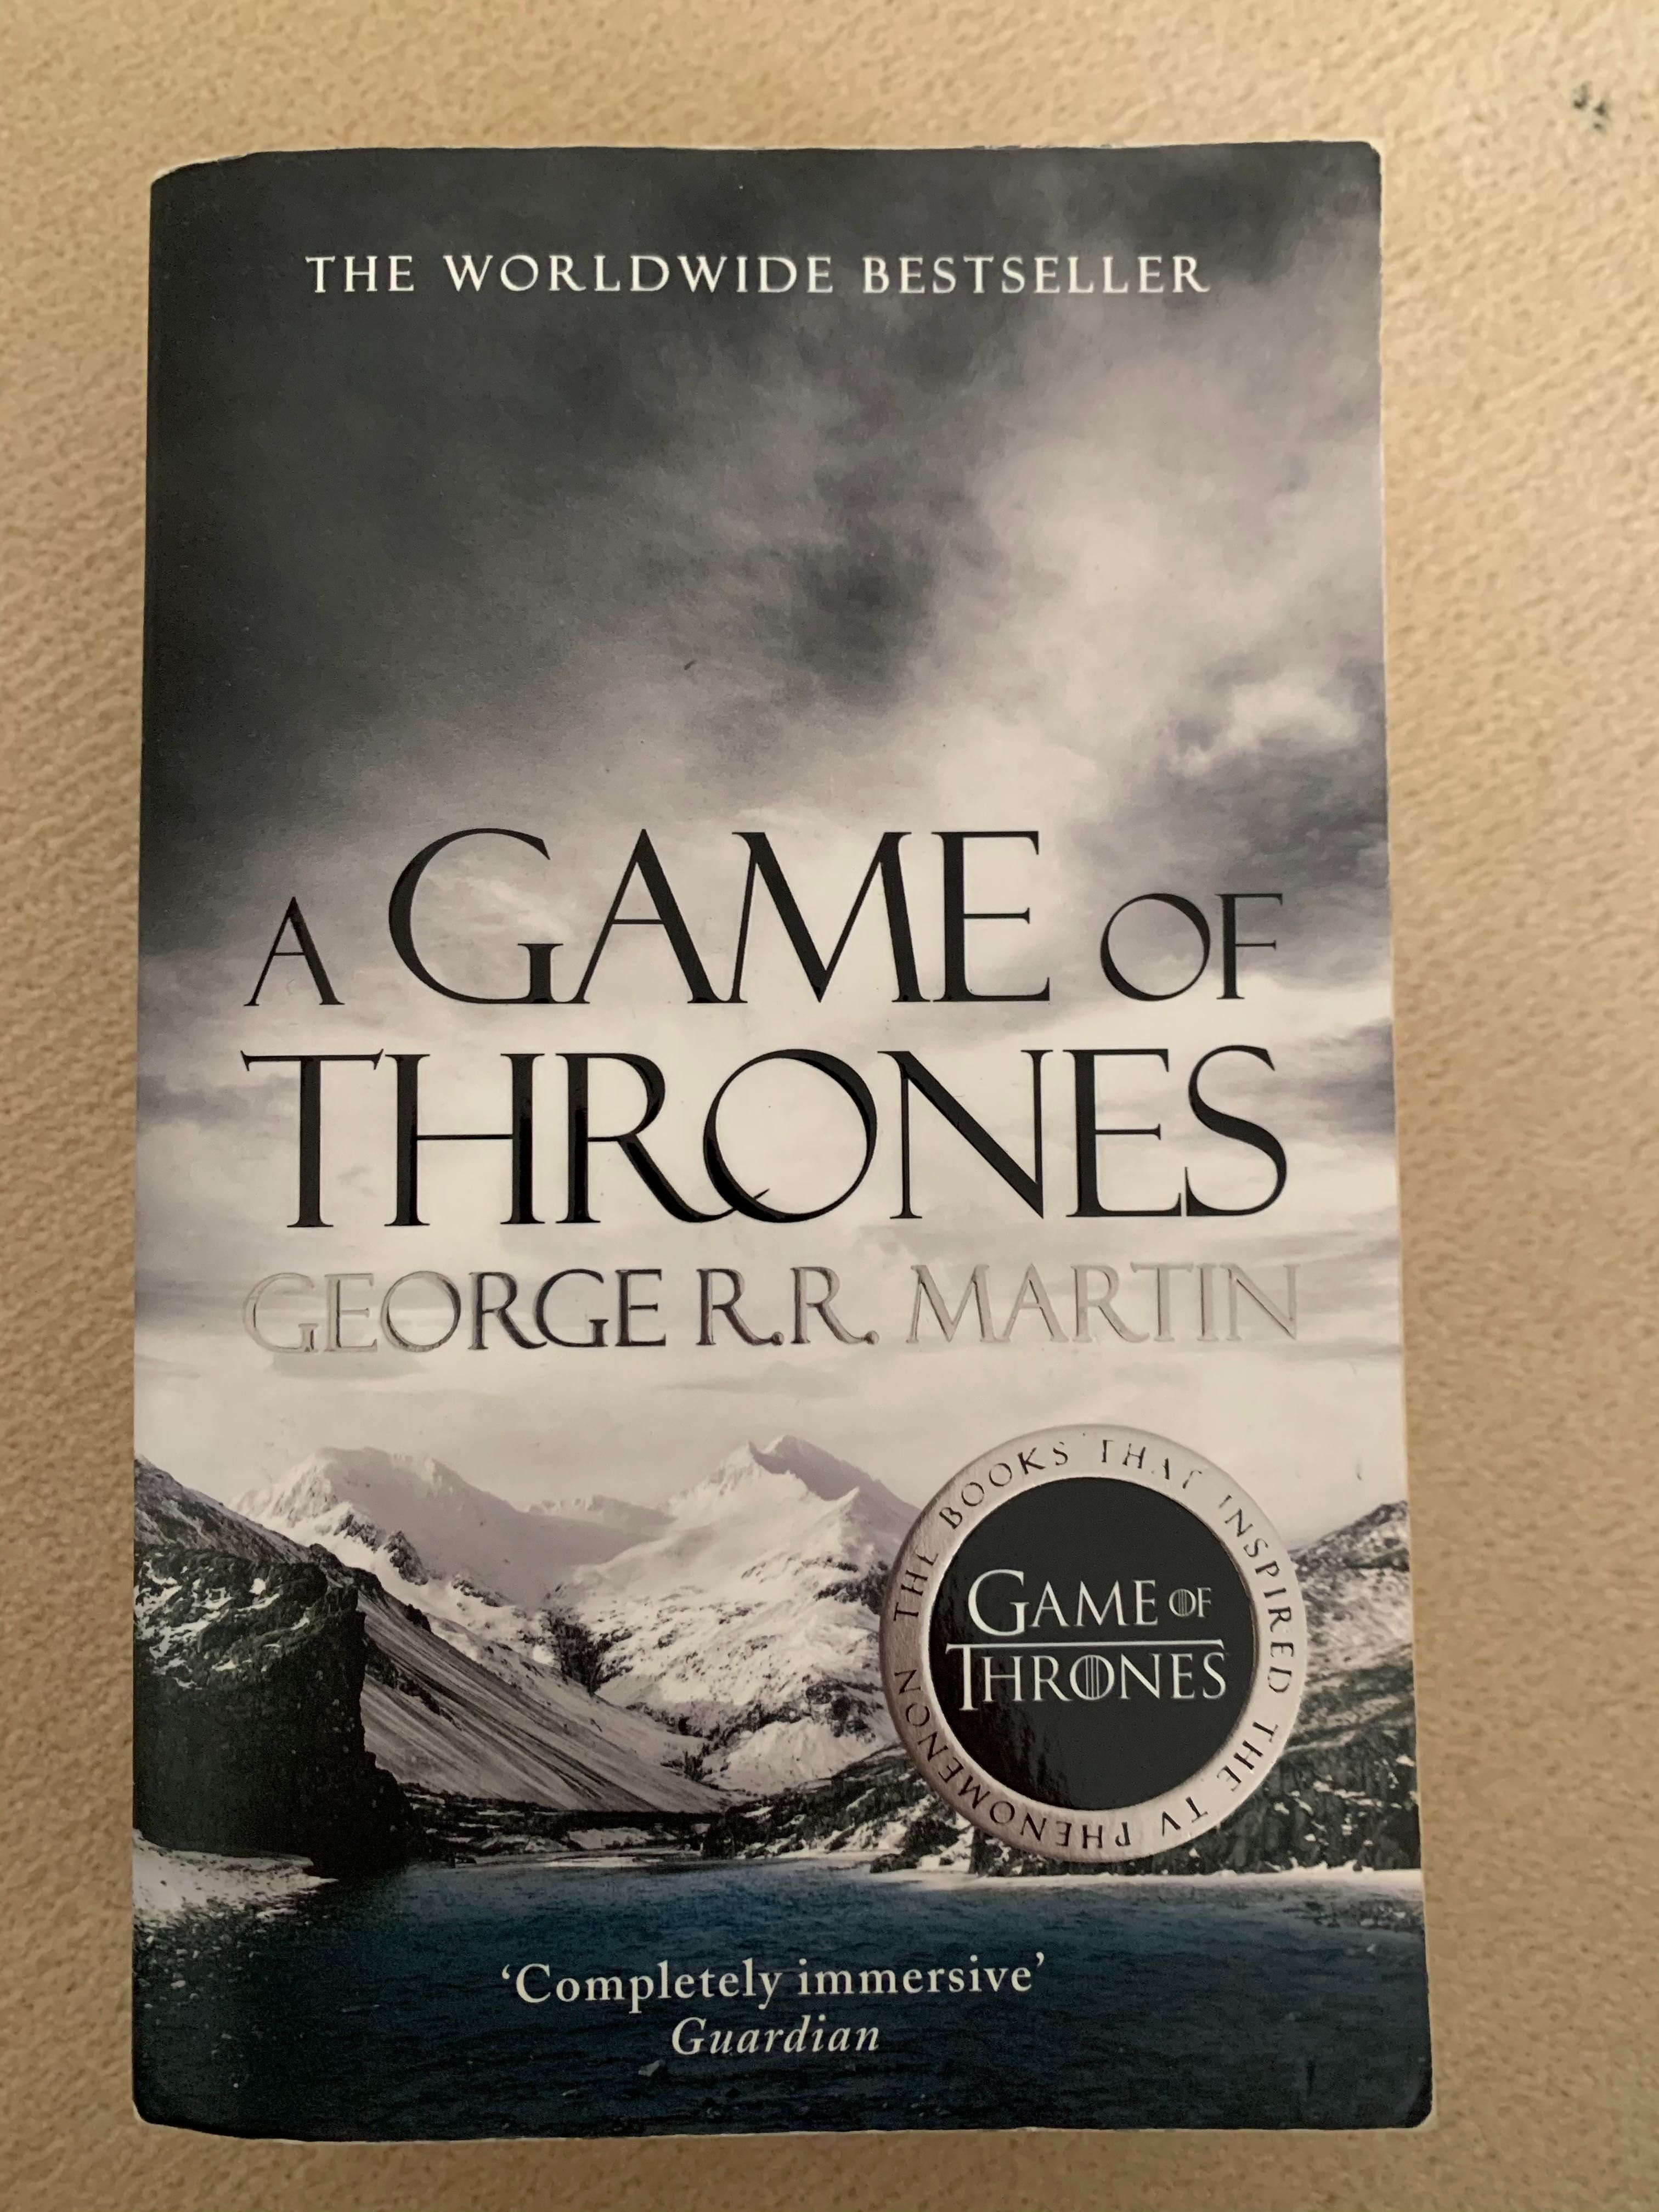 A Game of Thrones - George R. R. Martin (HarperVoyager)